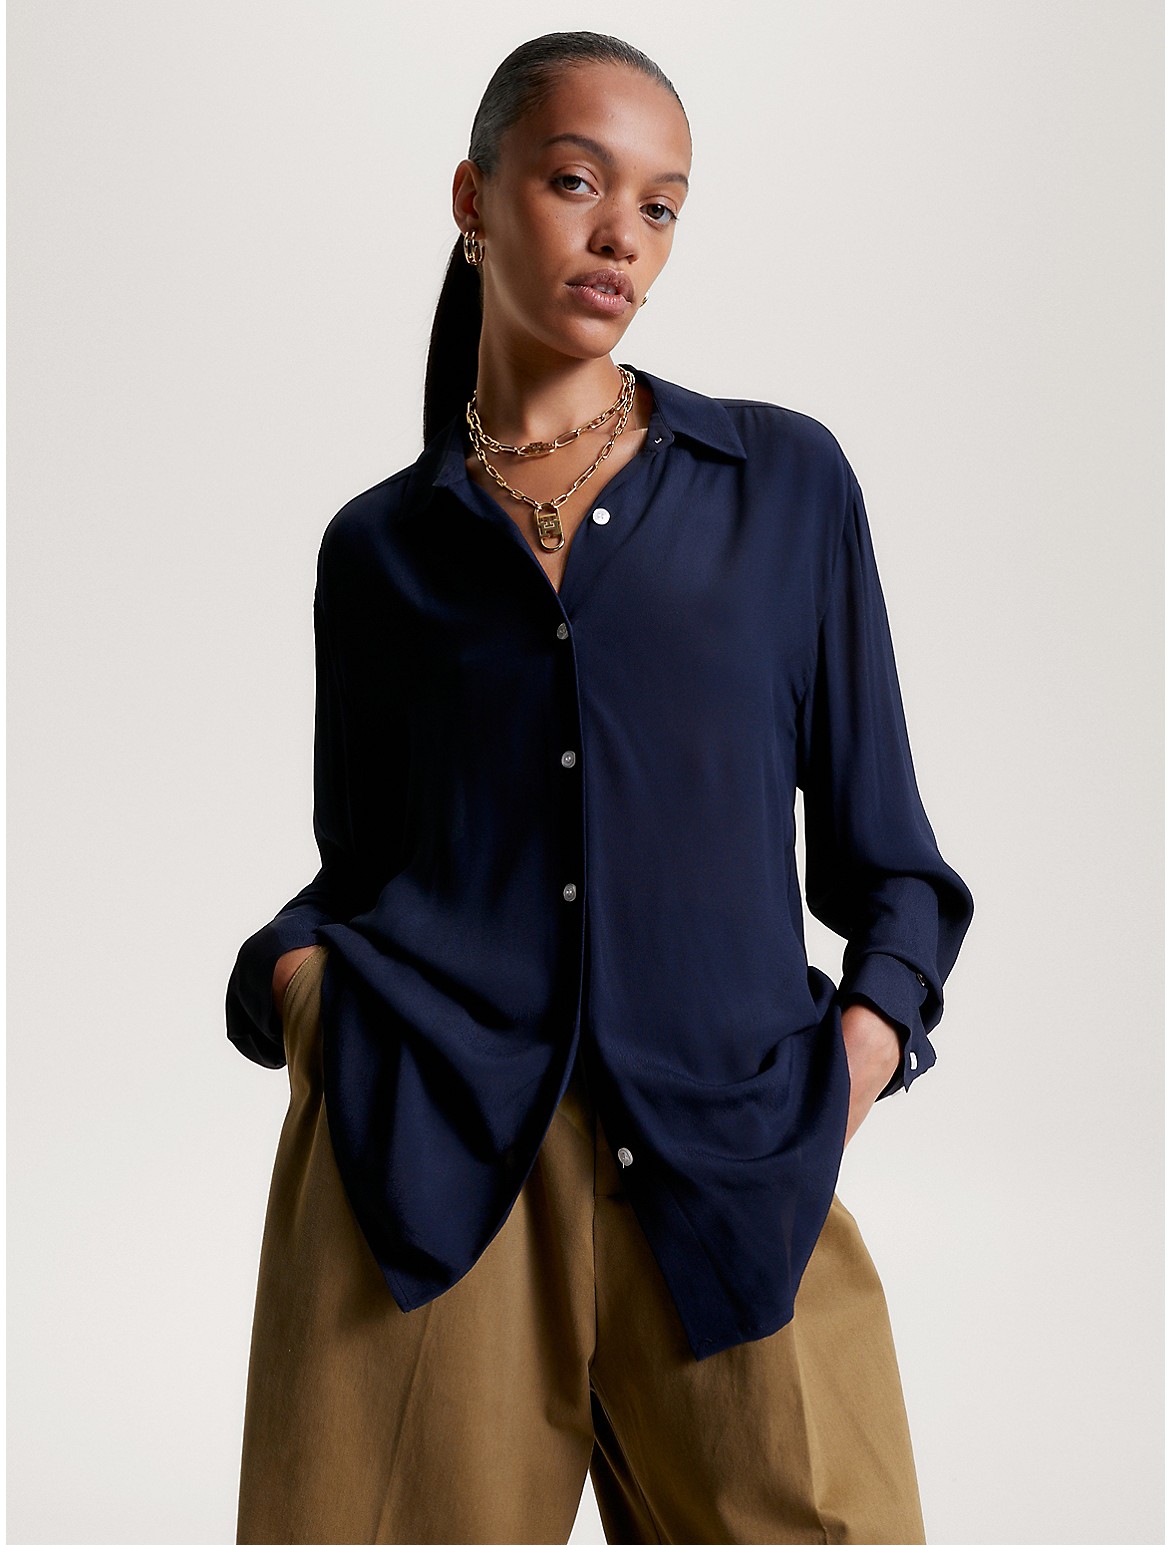 Tommy Hilfiger Women's Relaxed Fit Solid Crepe Shirt